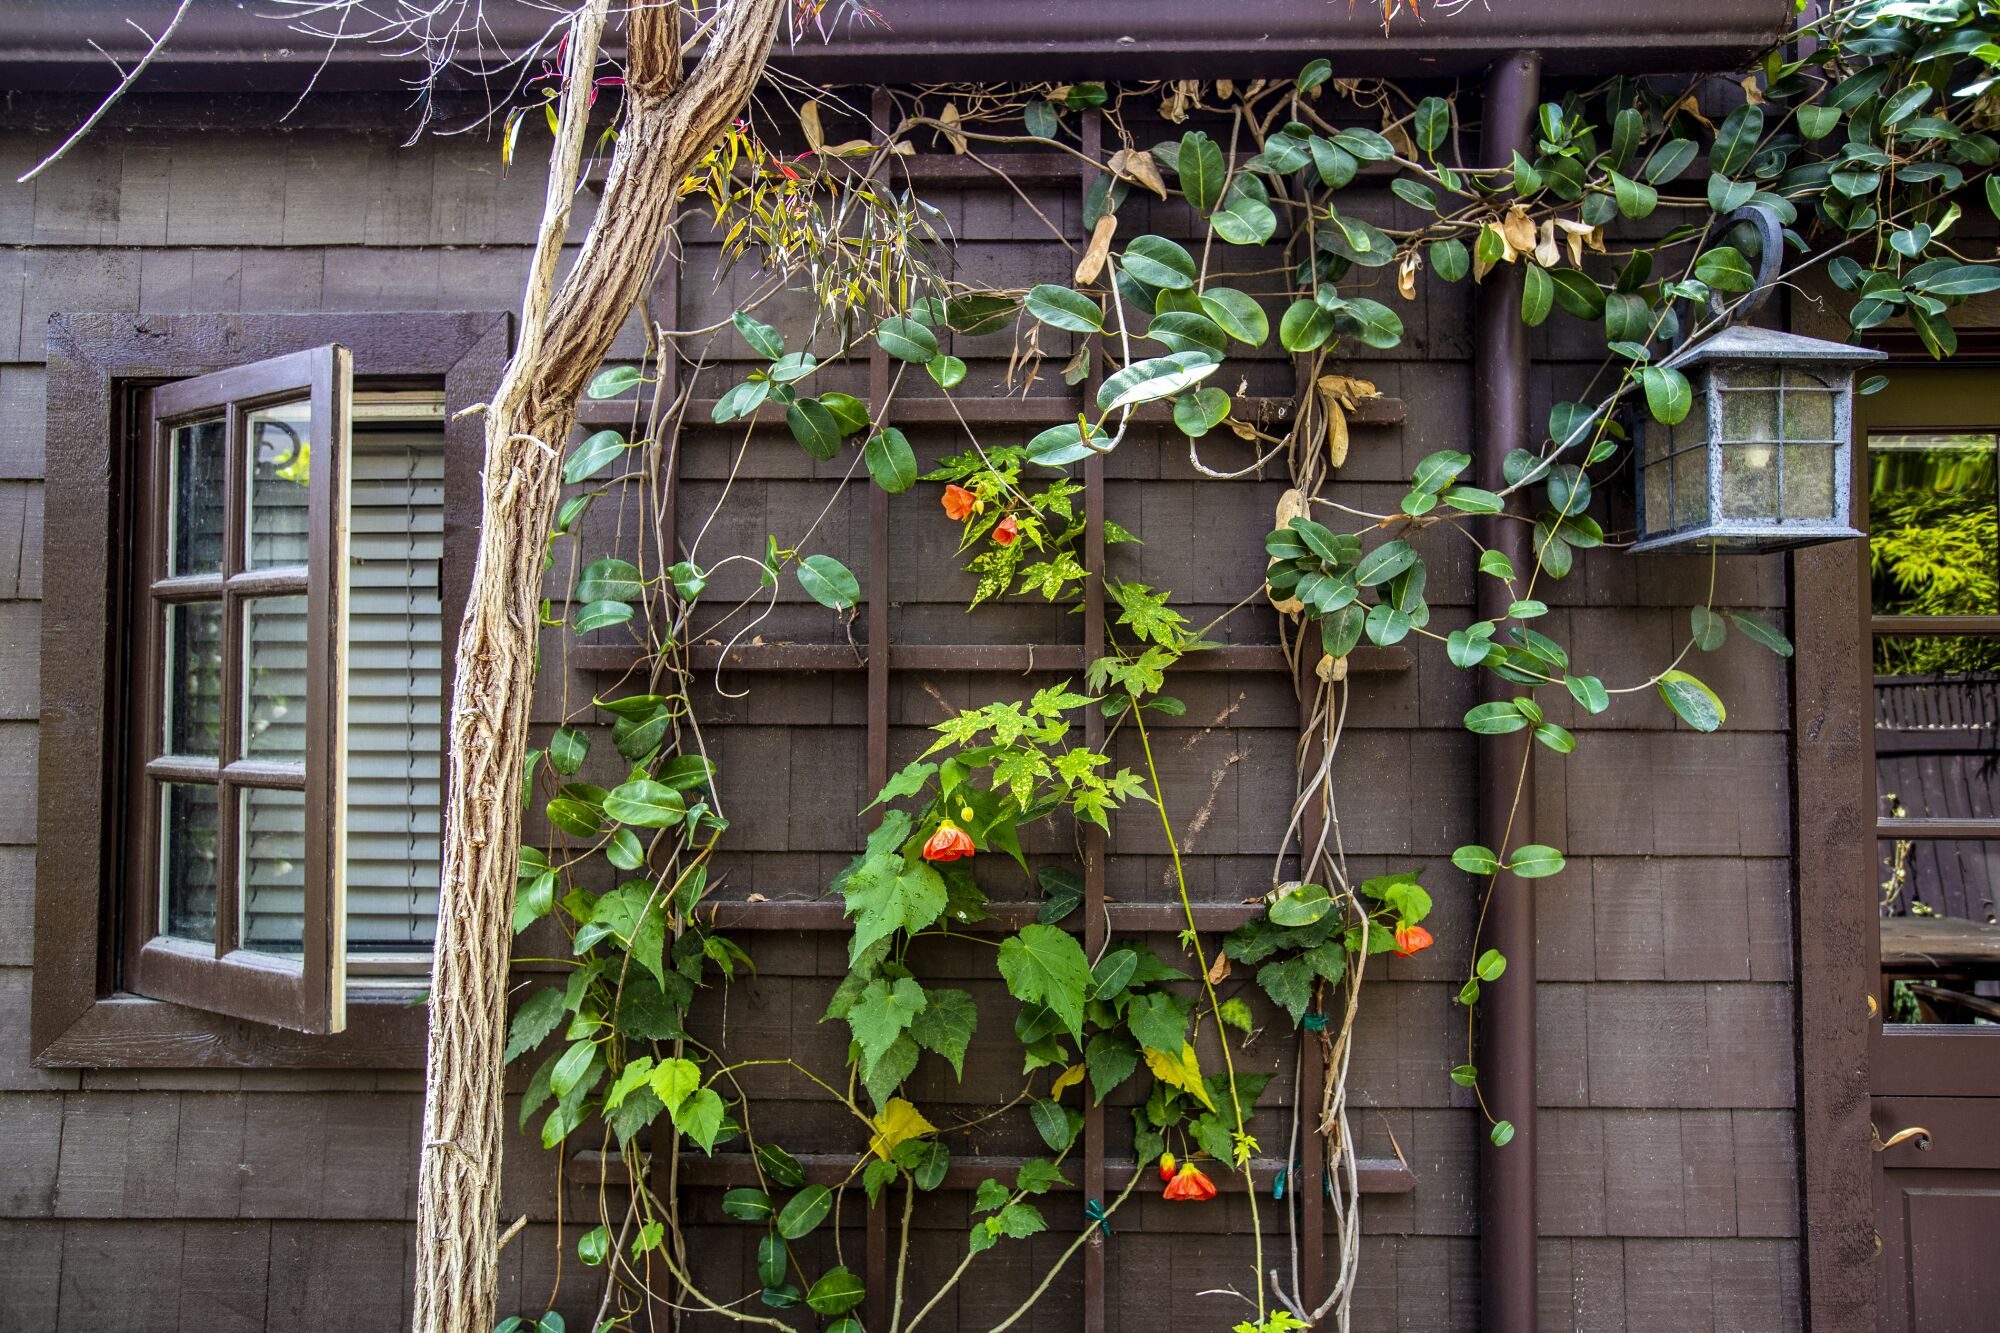 A plant with orange blooms grows on a trellis near a window